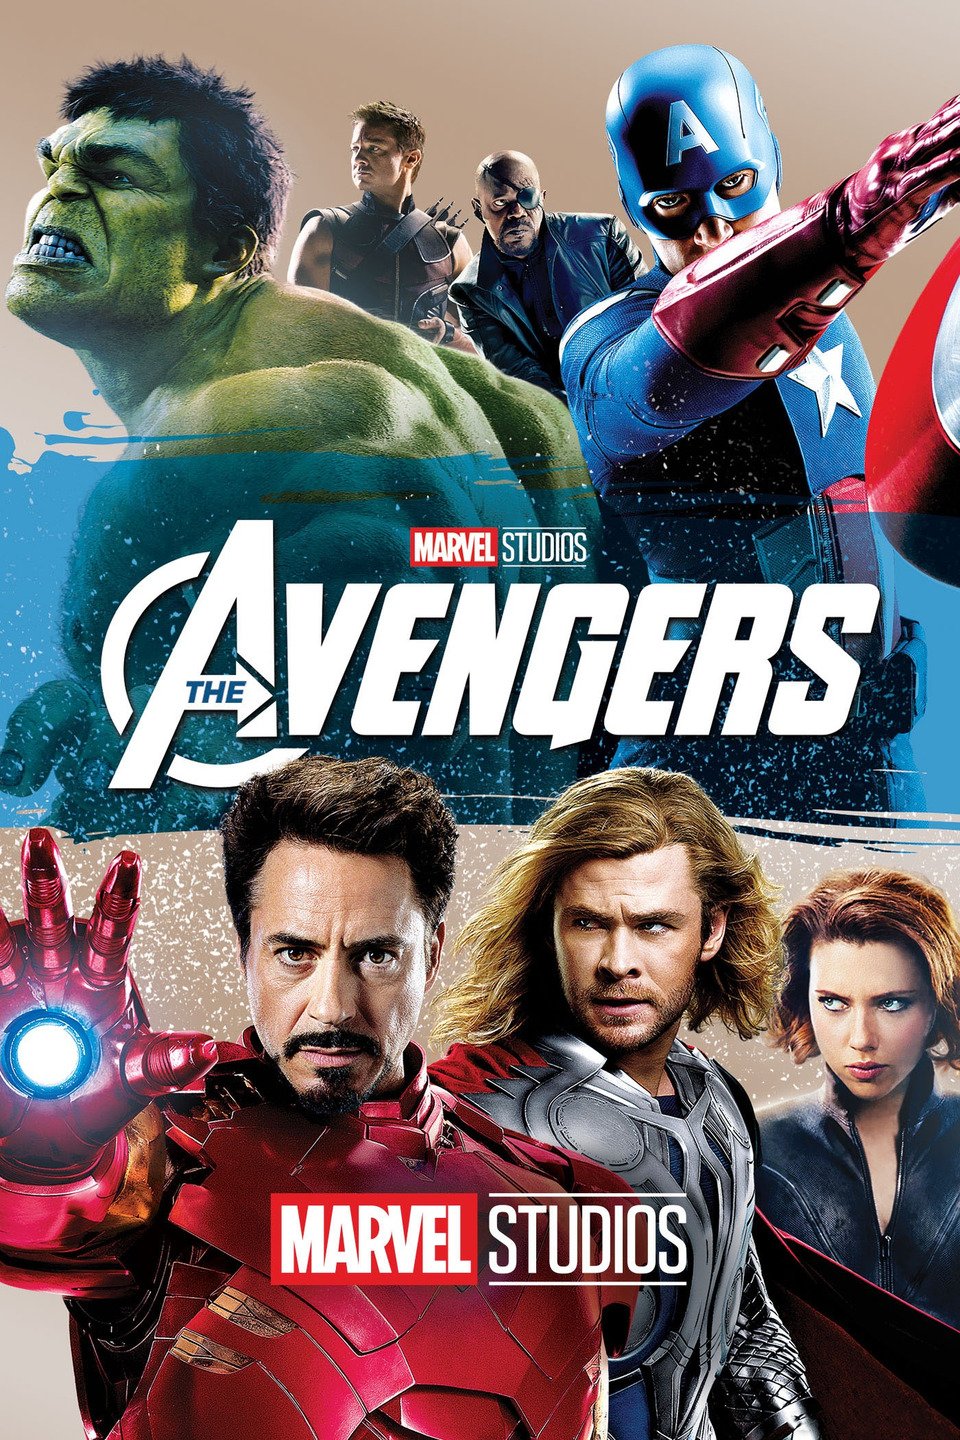 download the new version for iphoneThe Avengers